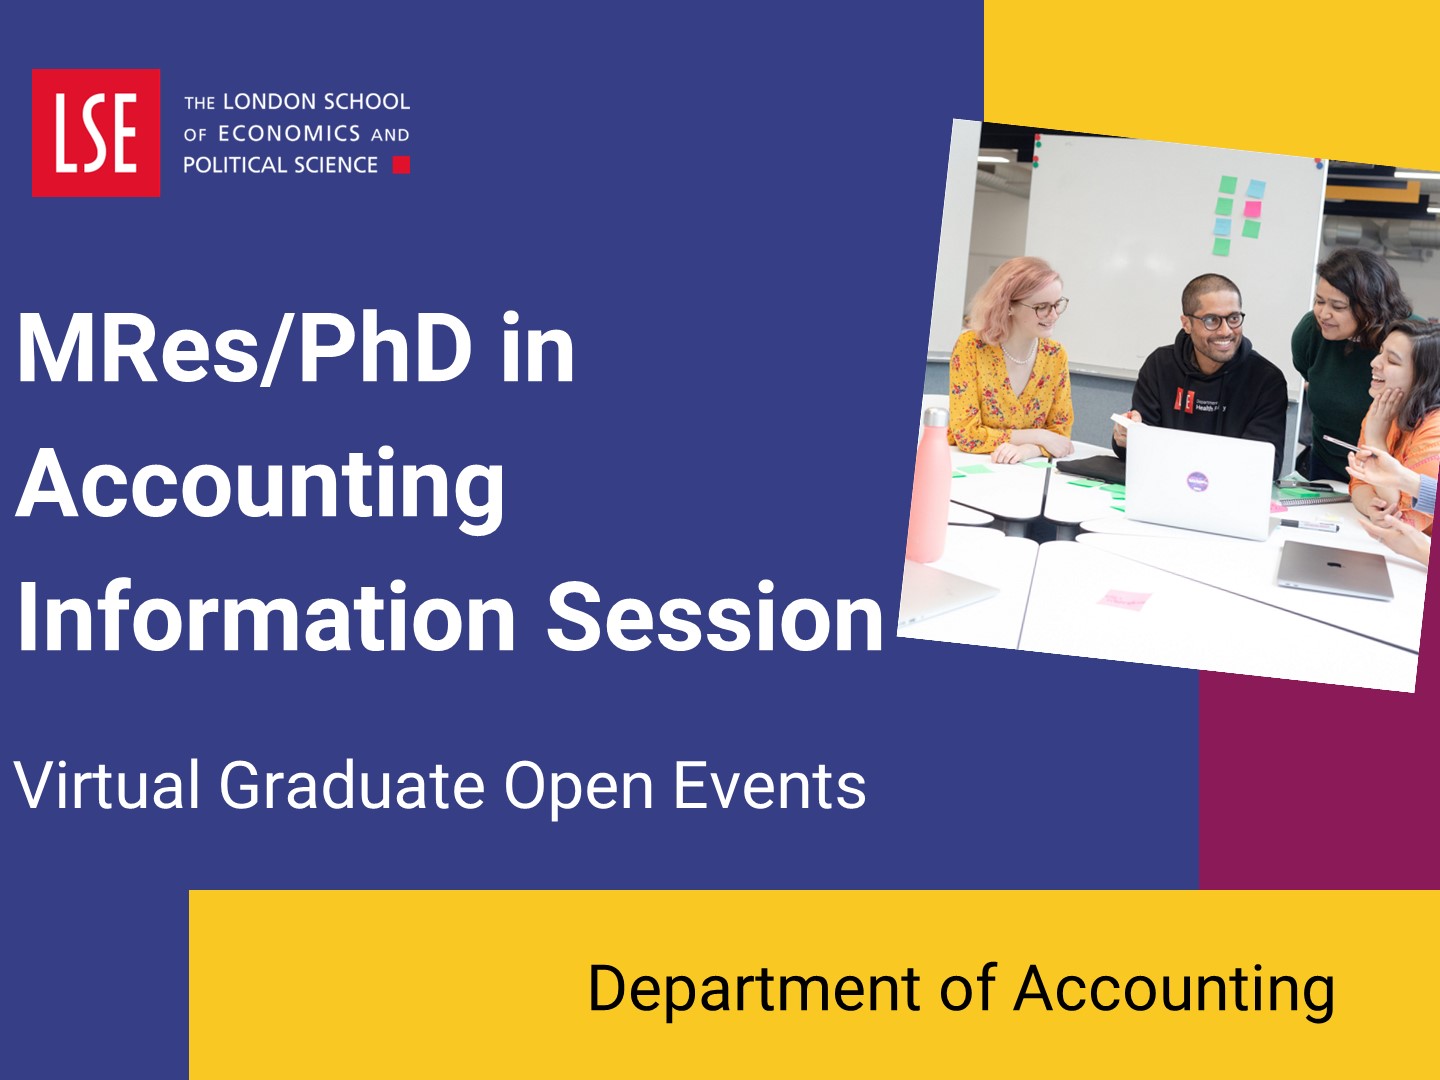 Introduction to the MRes/PhD in Accounting